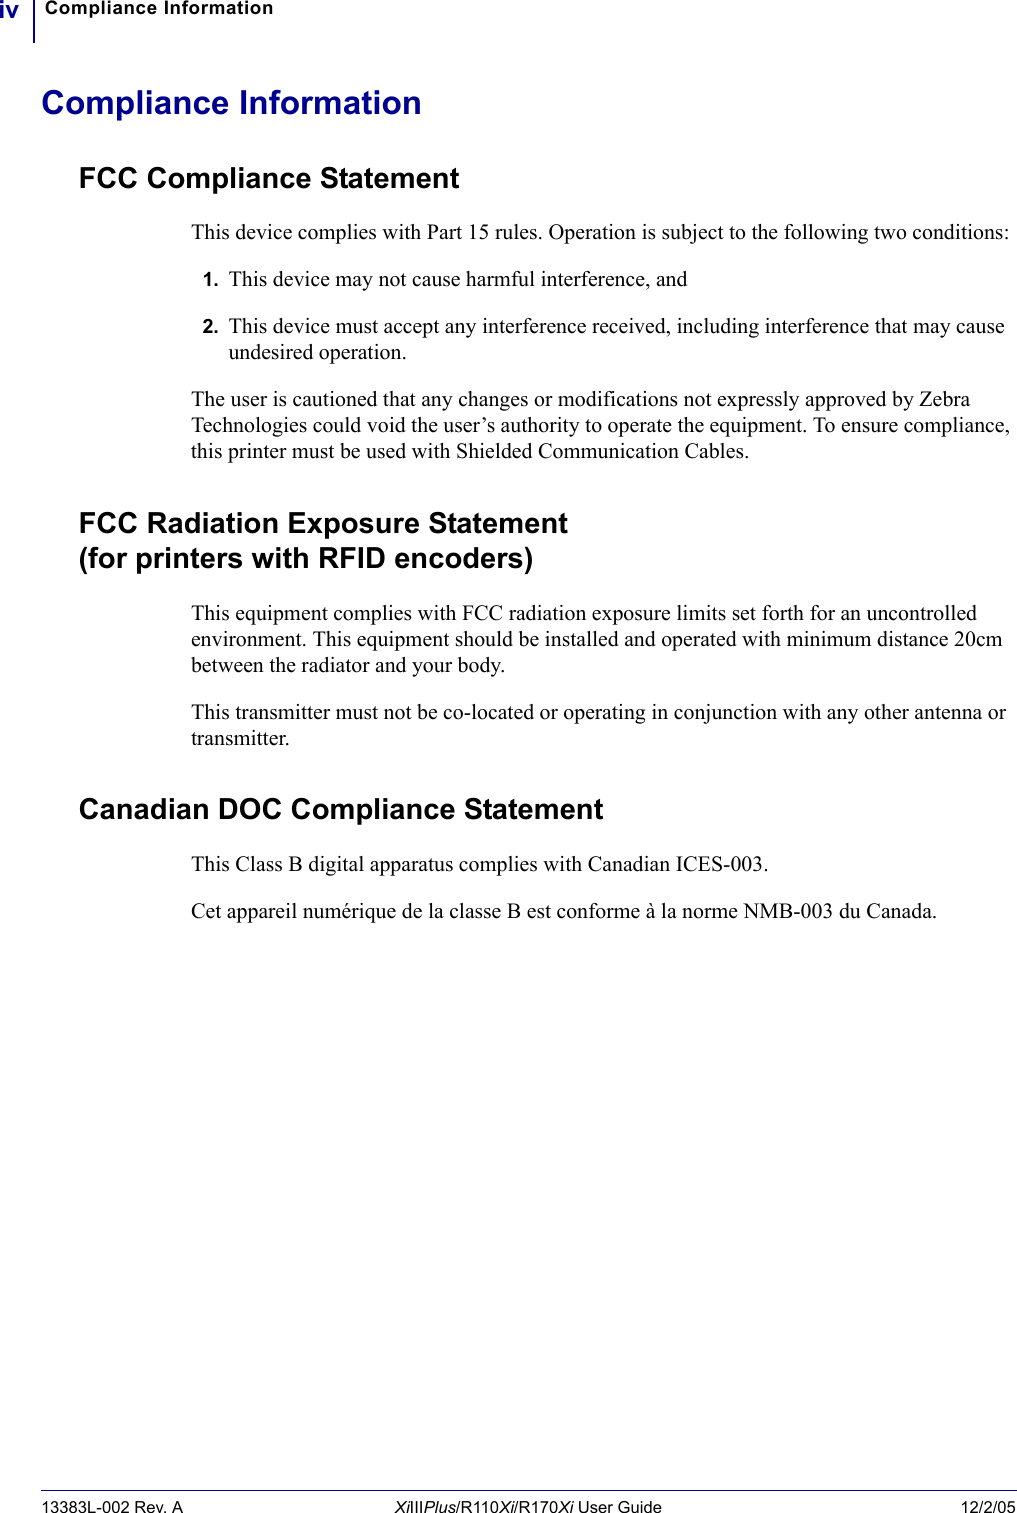 Compliance Informationiv13383L-002 Rev. A XiIIIPlus/R110Xi/R170Xi User Guide 12/2/05Compliance InformationFCC Compliance StatementThis device complies with Part 15 rules. Operation is subject to the following two conditions:1. This device may not cause harmful interference, and2. This device must accept any interference received, including interference that may cause undesired operation.The user is cautioned that any changes or modifications not expressly approved by Zebra Technologies could void the user’s authority to operate the equipment. To ensure compliance, this printer must be used with Shielded Communication Cables.FCC Radiation Exposure Statement (for printers with RFID encoders)This equipment complies with FCC radiation exposure limits set forth for an uncontrolled environment. This equipment should be installed and operated with minimum distance 20cm between the radiator and your body.This transmitter must not be co-located or operating in conjunction with any other antenna or transmitter.Canadian DOC Compliance StatementThis Class B digital apparatus complies with Canadian ICES-003. Cet appareil numérique de la classe B est conforme à la norme NMB-003 du Canada.